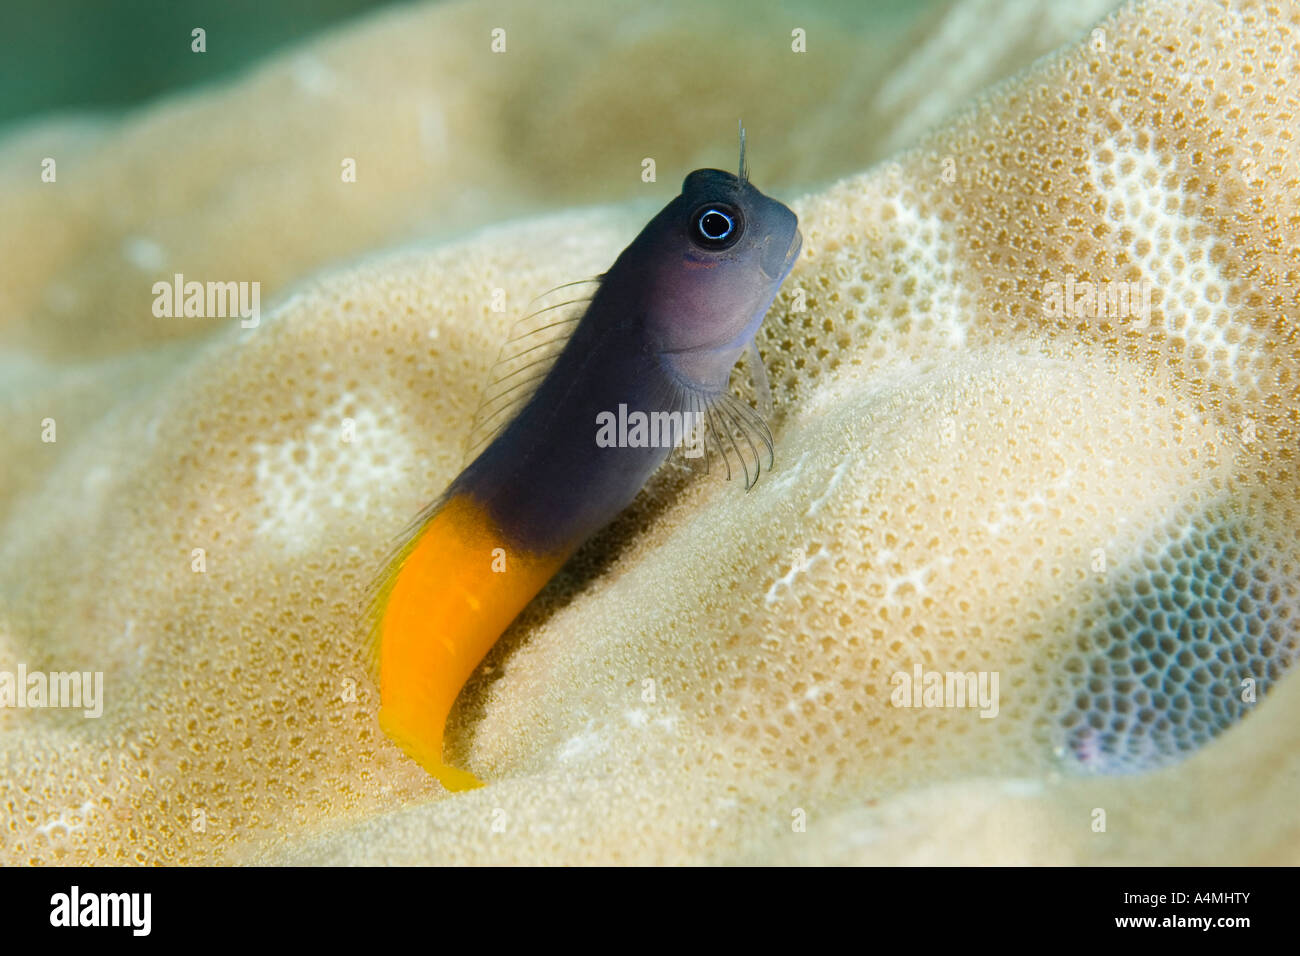 Bicolor Blenny, Ecsenius bicolor perched on coral Stock Photo